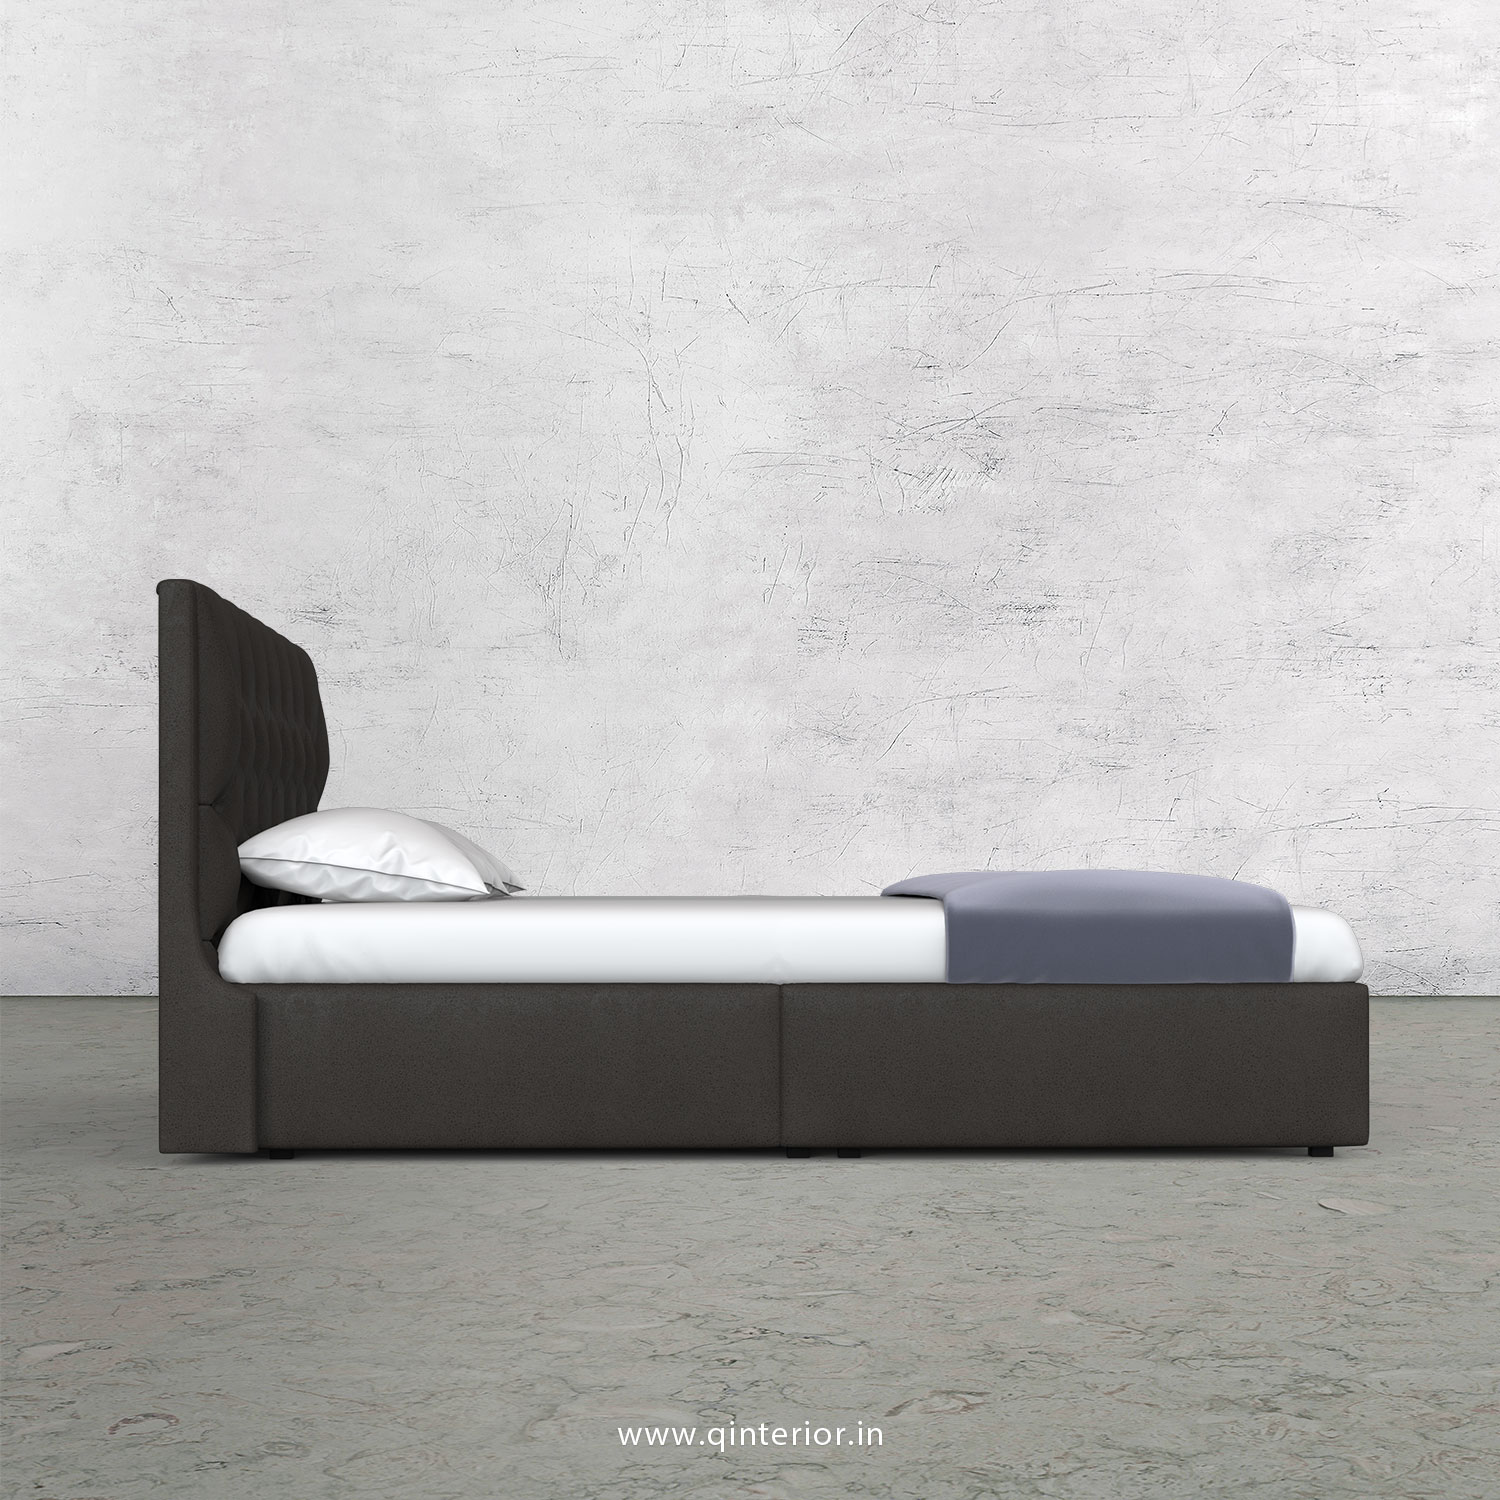 Scorpius Queen Bed in Fab Leather Fabric - QBD009 FL15